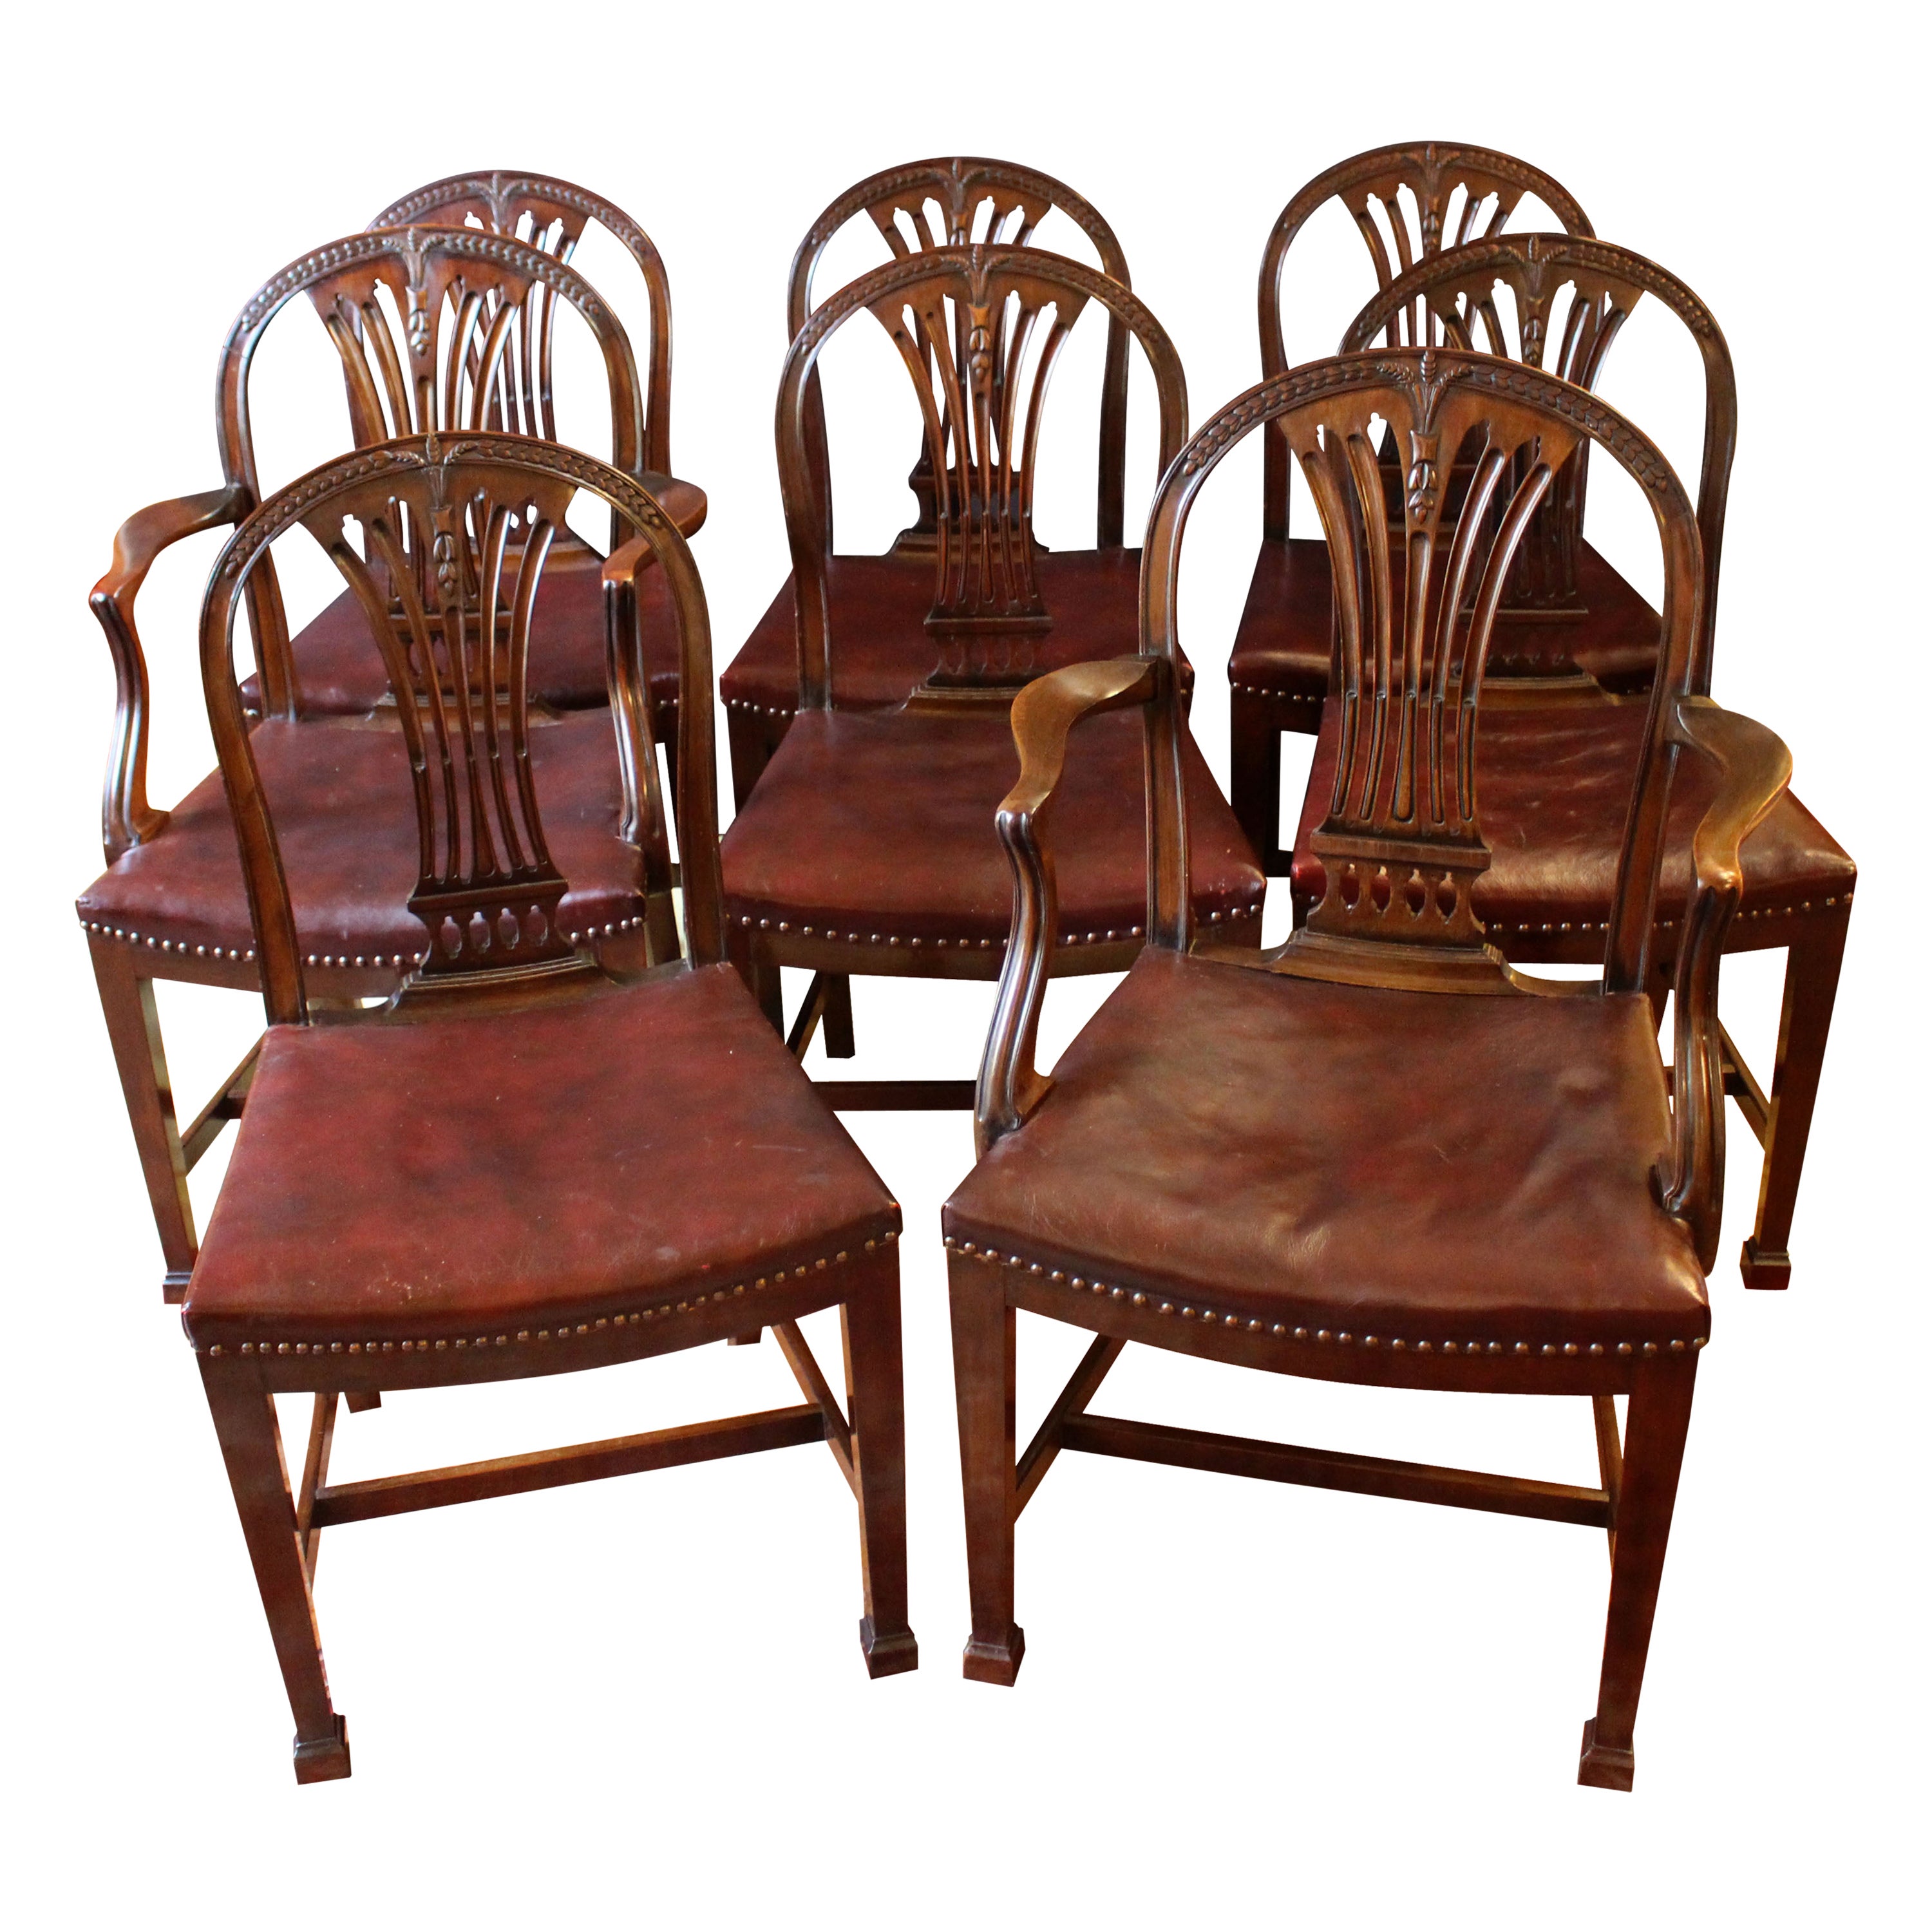 Late 19th Century Set of 8 Hepplewhite Style Dining Chairs